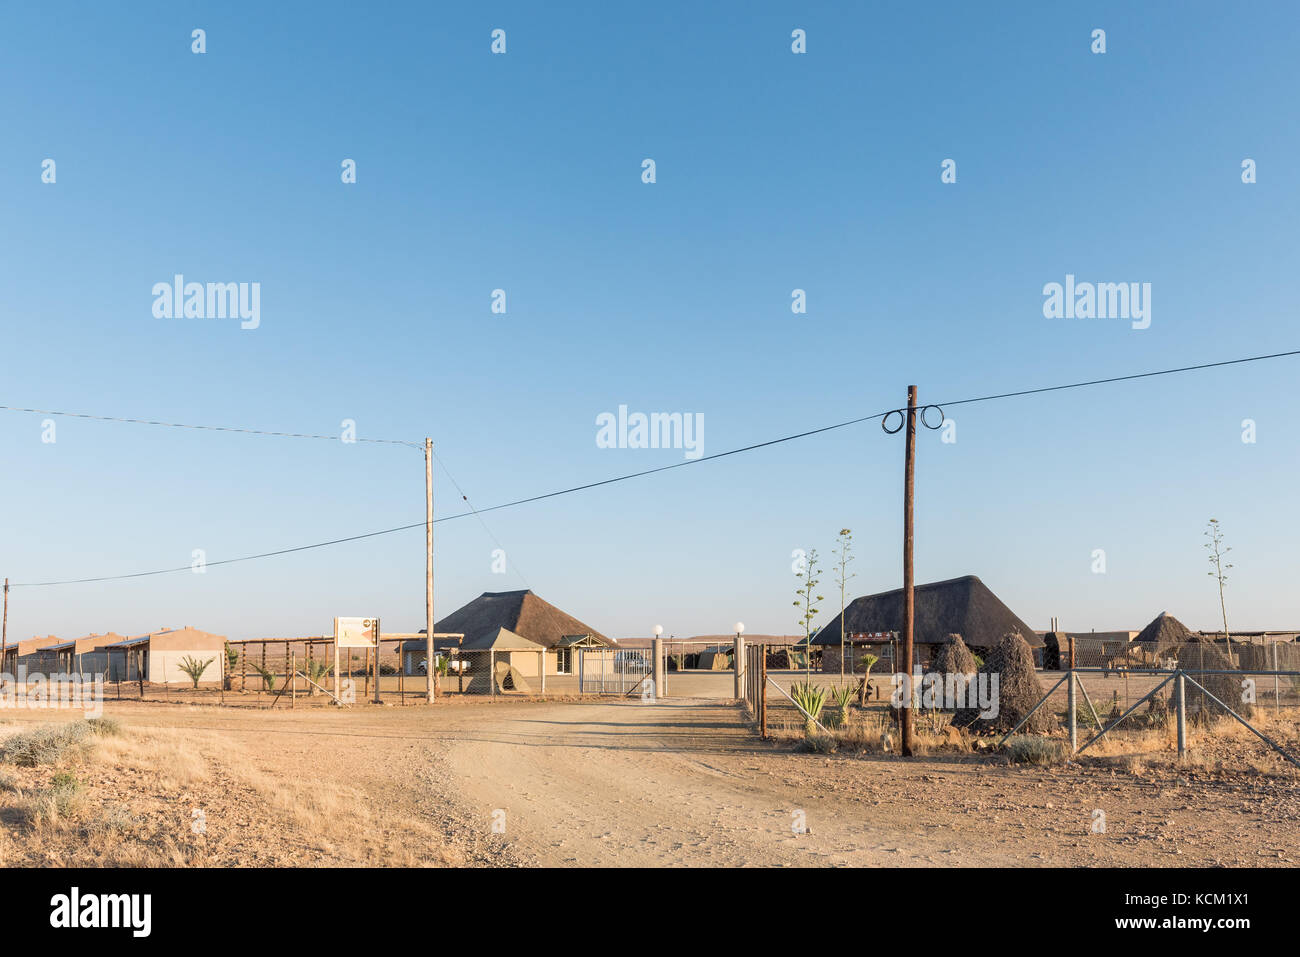 RIETFONTEIN, SOUTH AFRICA - JULY 6, 2017: Self-catering and camping facilities at the Rietfontein Border Post in South Africa on the border with Namib Stock Photo